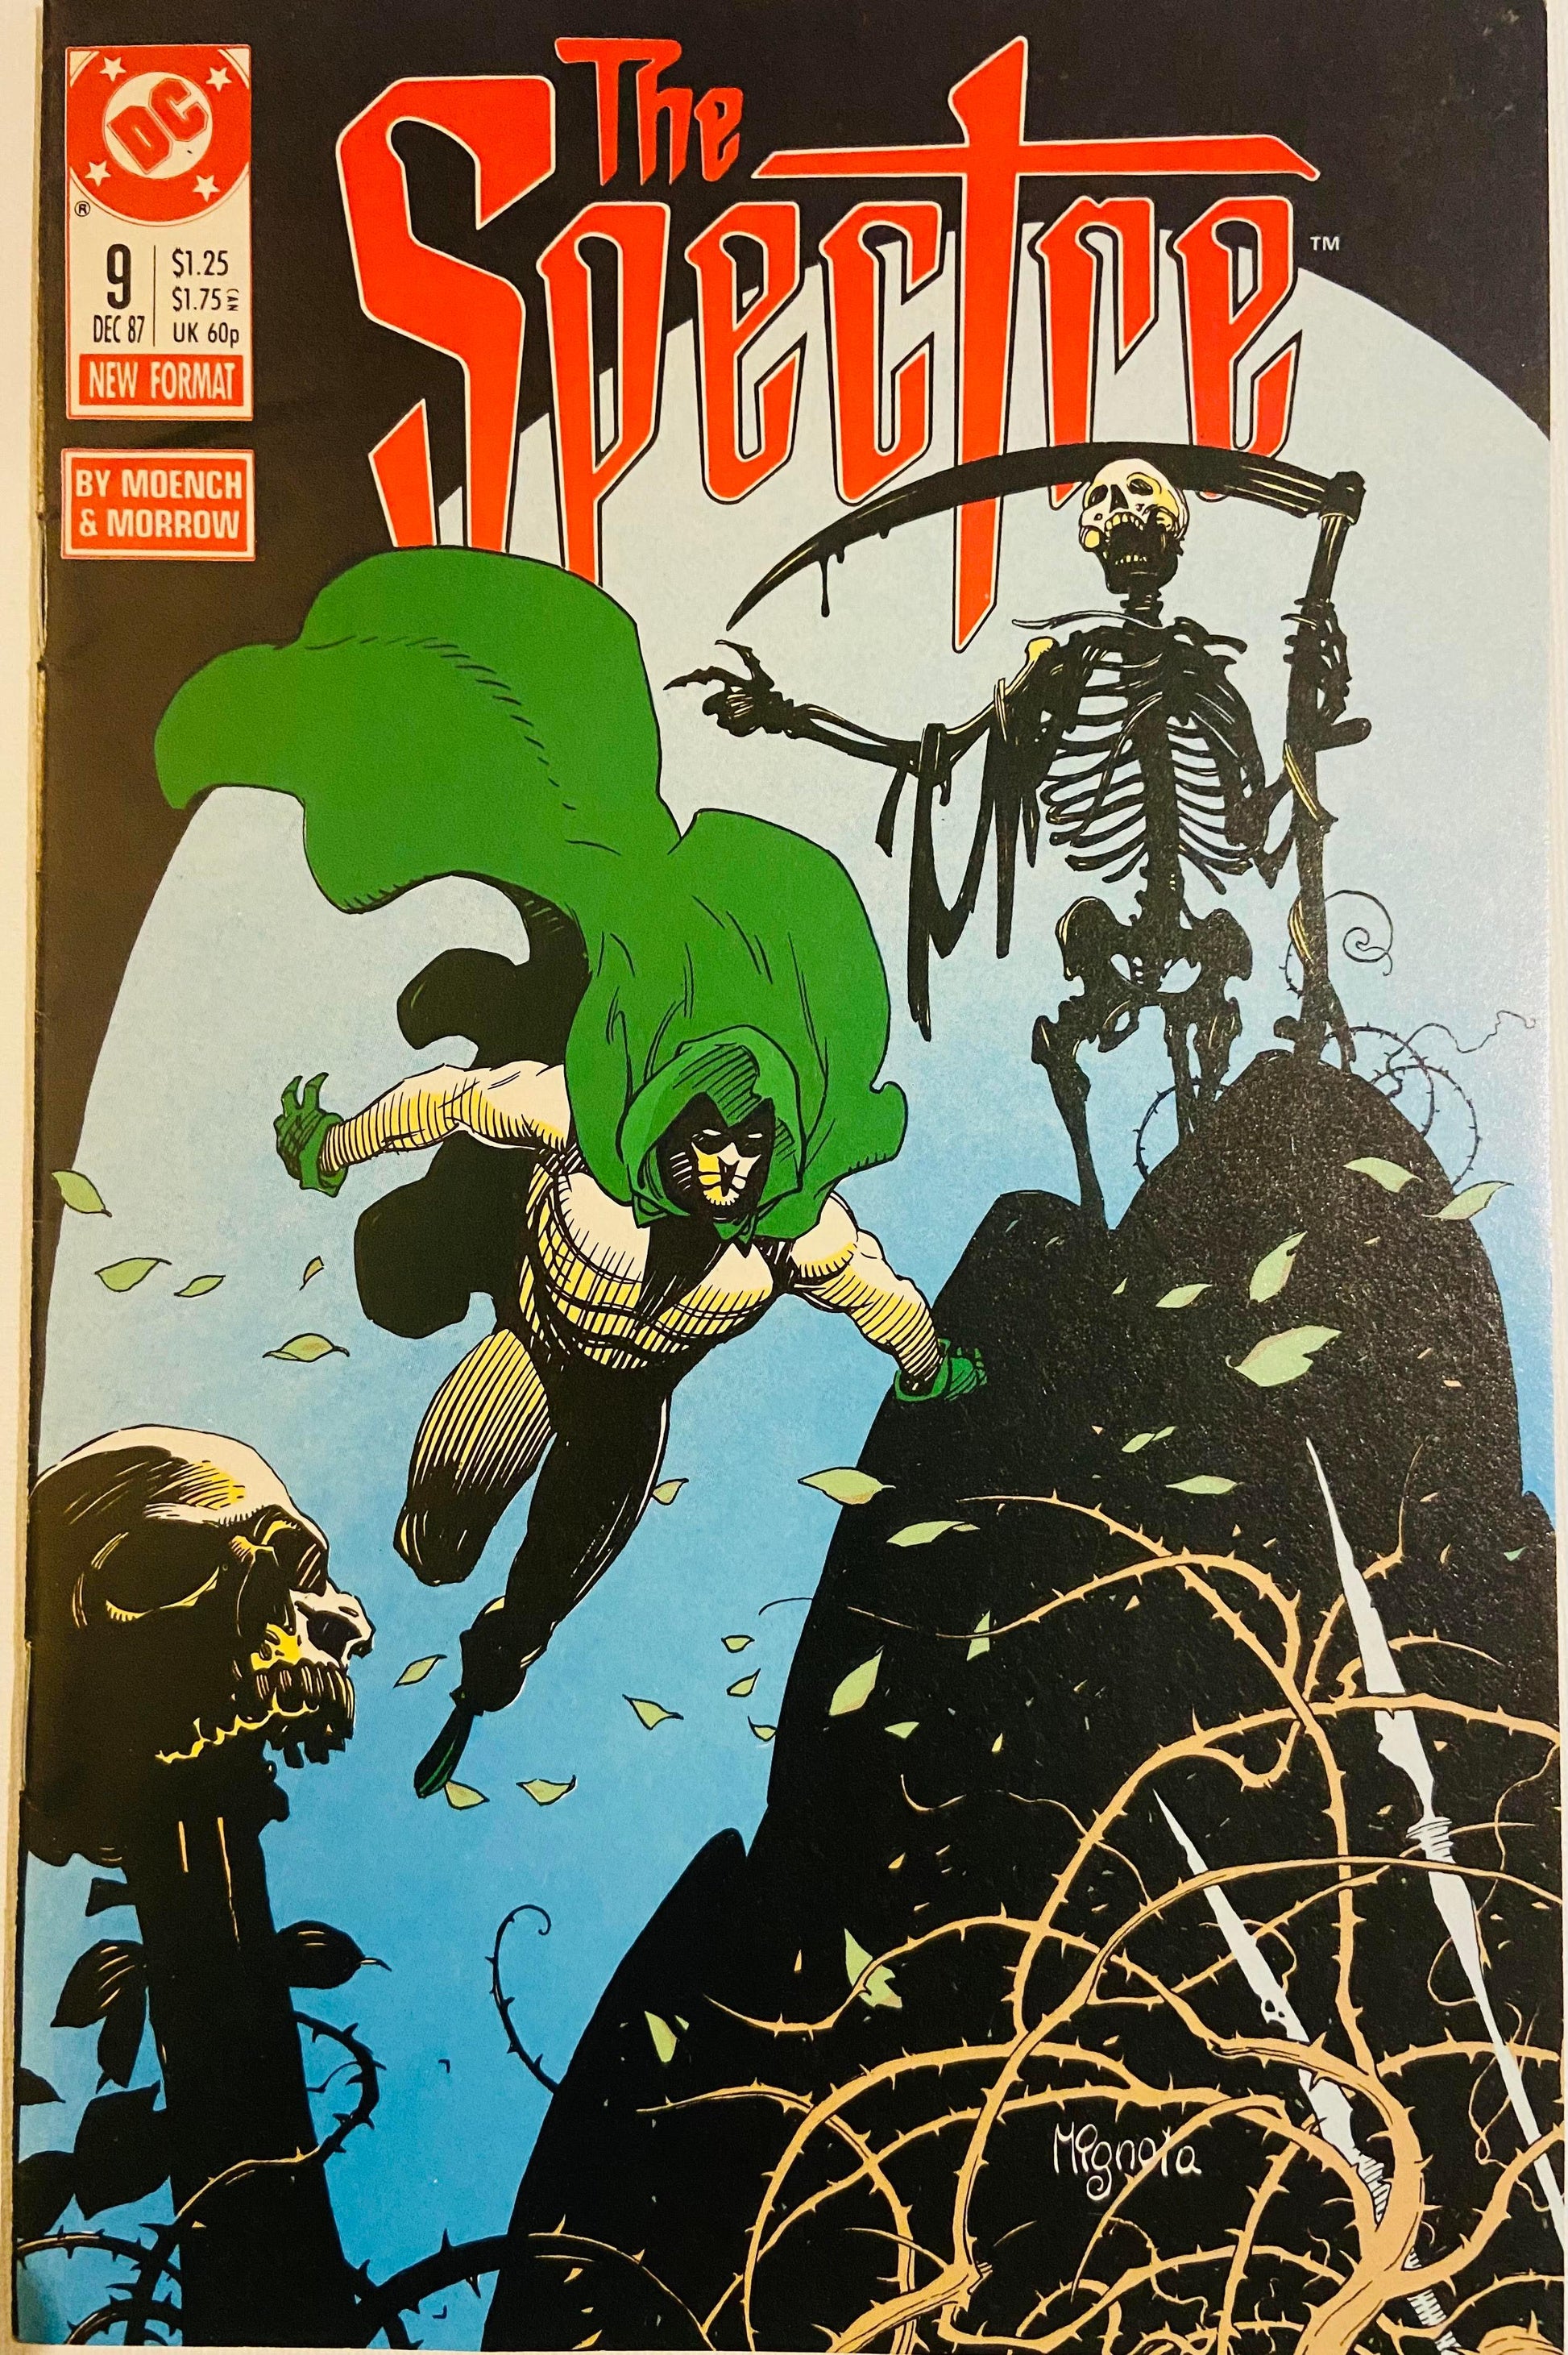 The Spectre - HolyGrail Comix